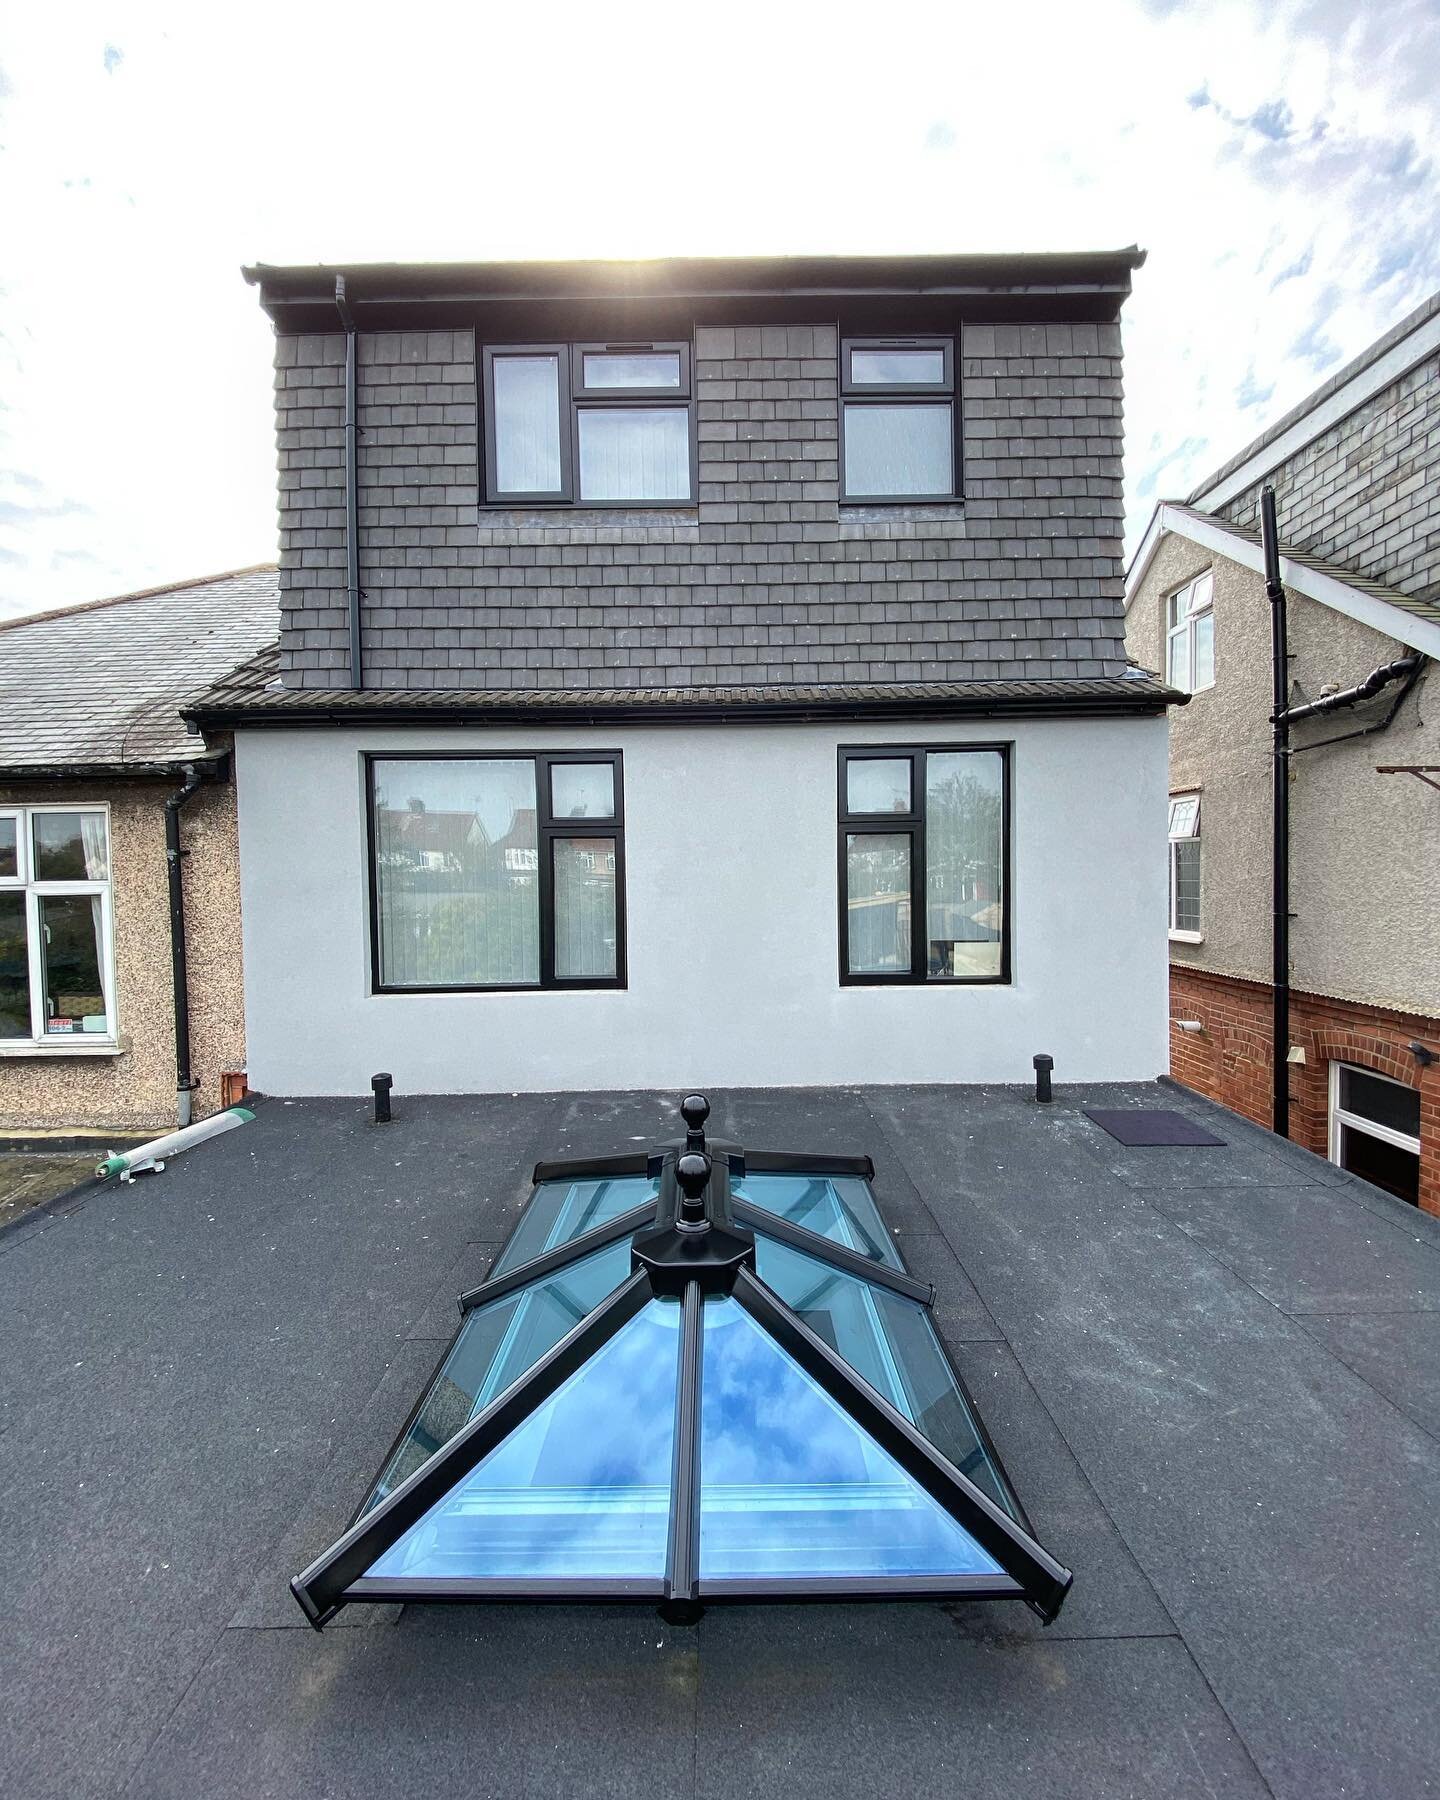 Another look at the house we transformed the other day! The windows on the back of the house and roof conservatory were sprayed Satin Black from White to compliment the rendering. Swipe to see what it looked like before! 🎨💎

Call us on 08004700990 